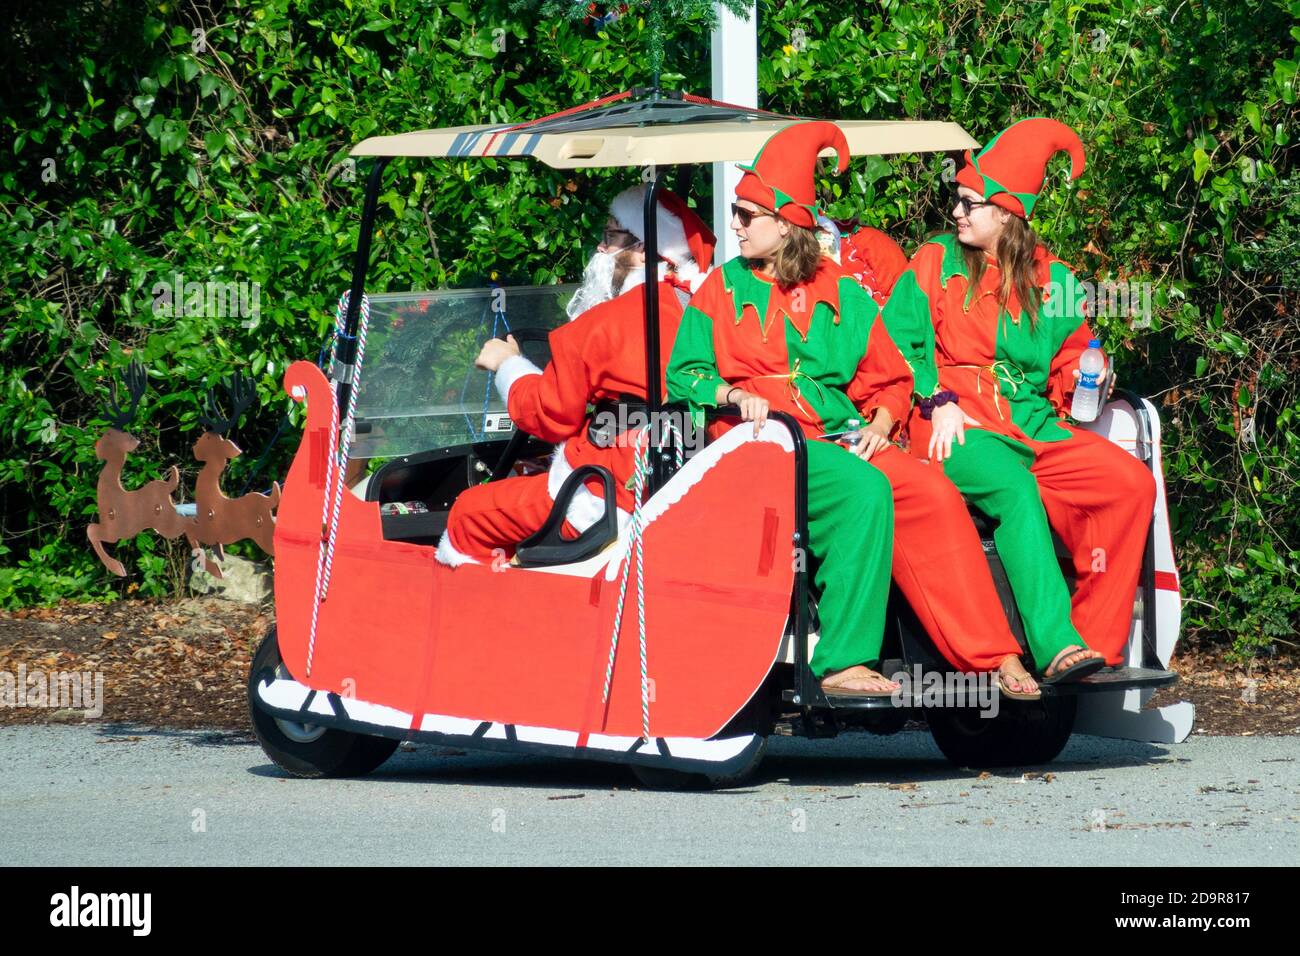 Santa and his elves ride a golf cart decorated as a sled during the  annual Independence Day parade July 4, 2019 in Sullivan's Island, South Carolina. The tank was a tongue-in-check reference to the controversy over the military parade in Washington. Stock Photo